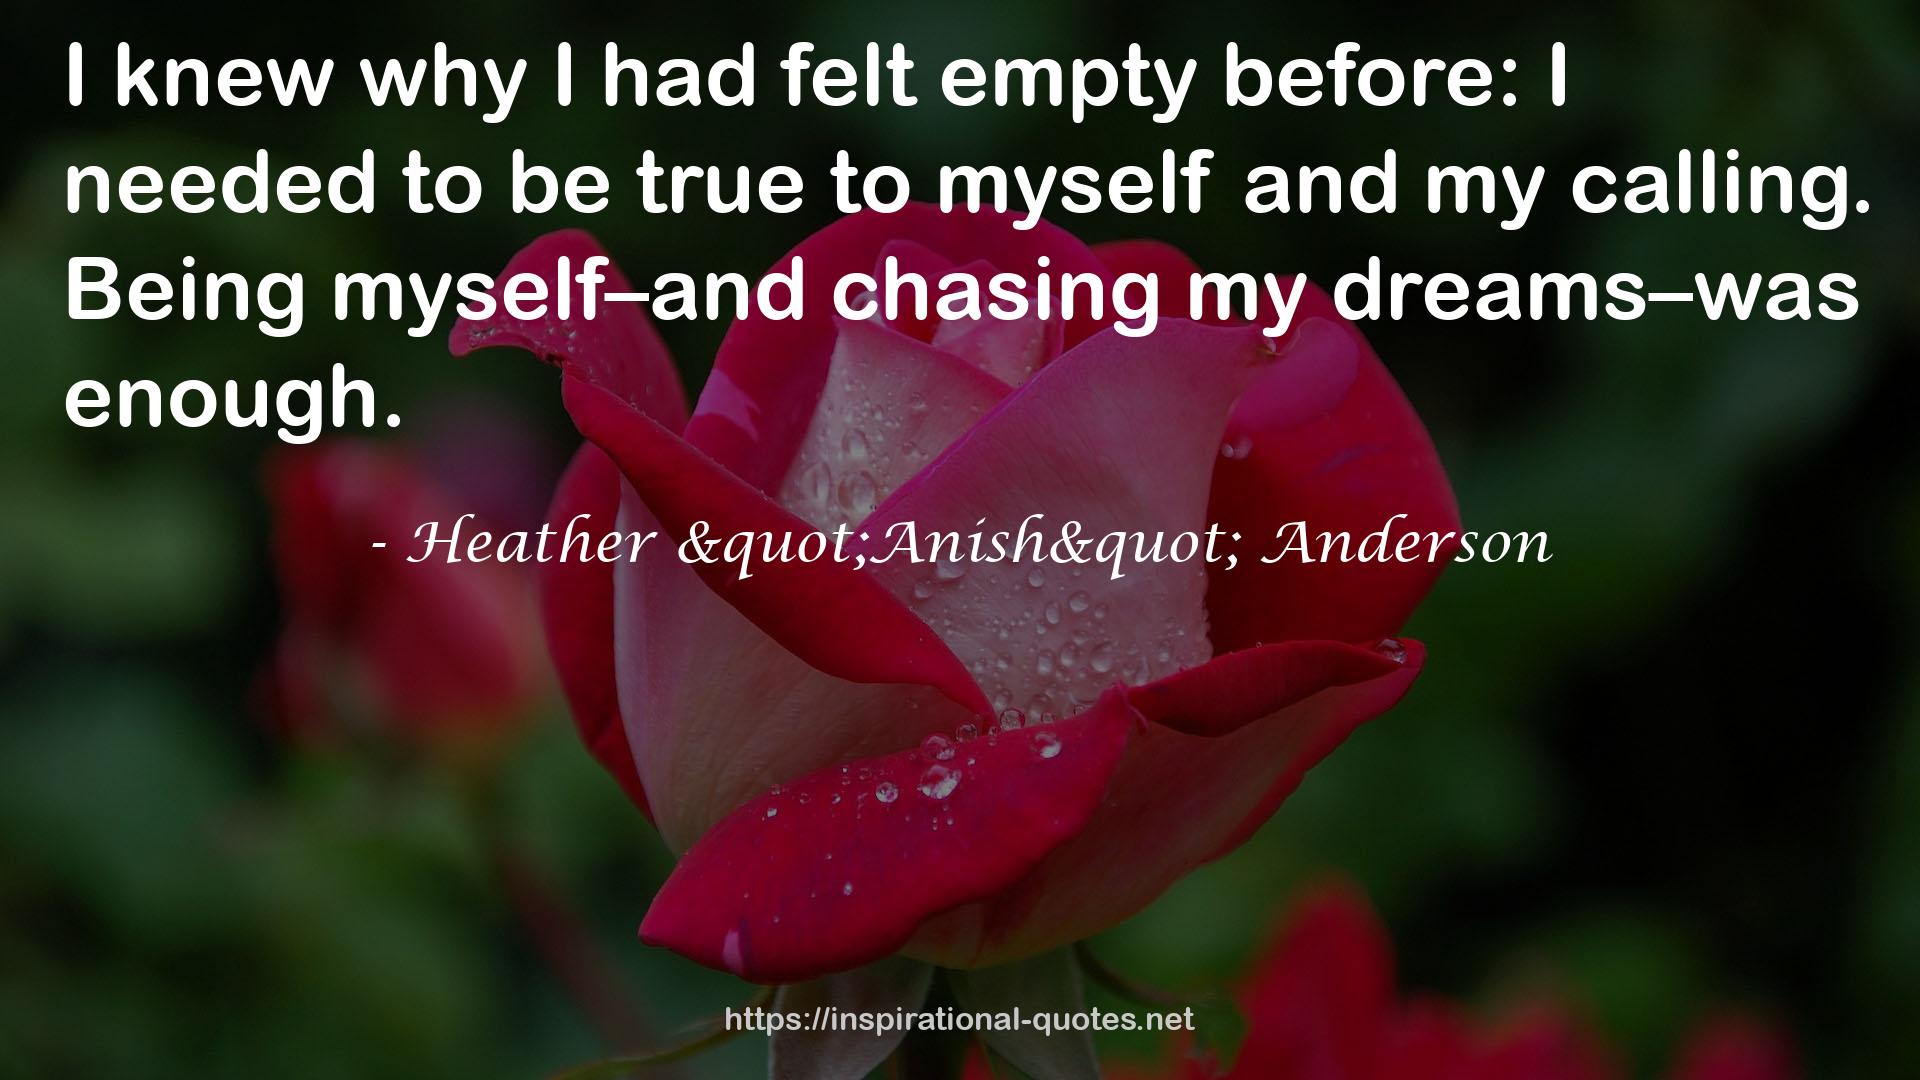 Heather "Anish" Anderson QUOTES